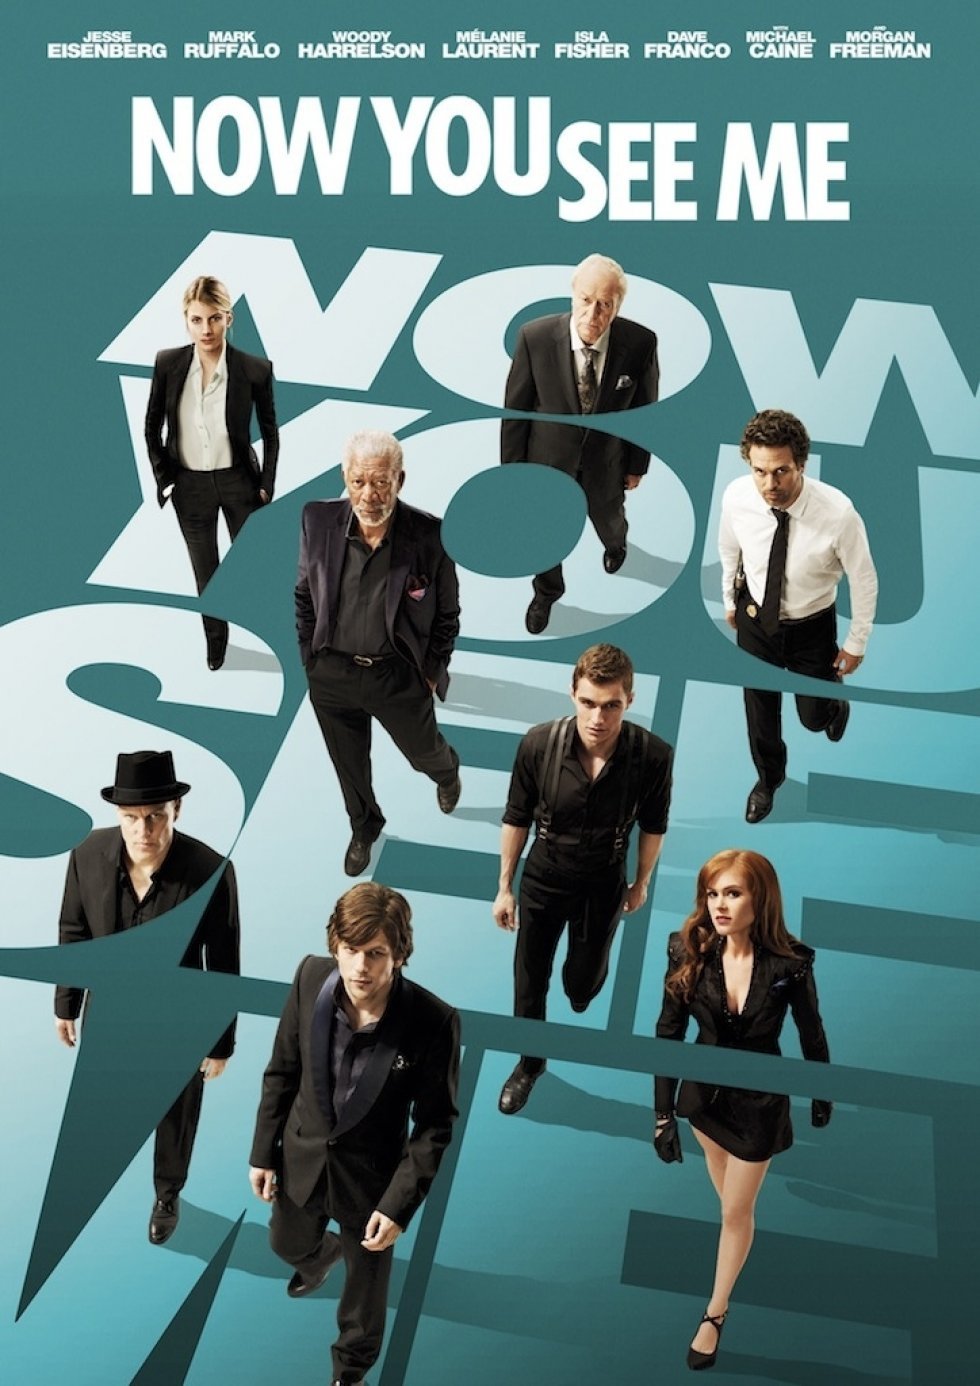 Foto: Nordisk Film A/S - [Anmeldelse]: Now you see me